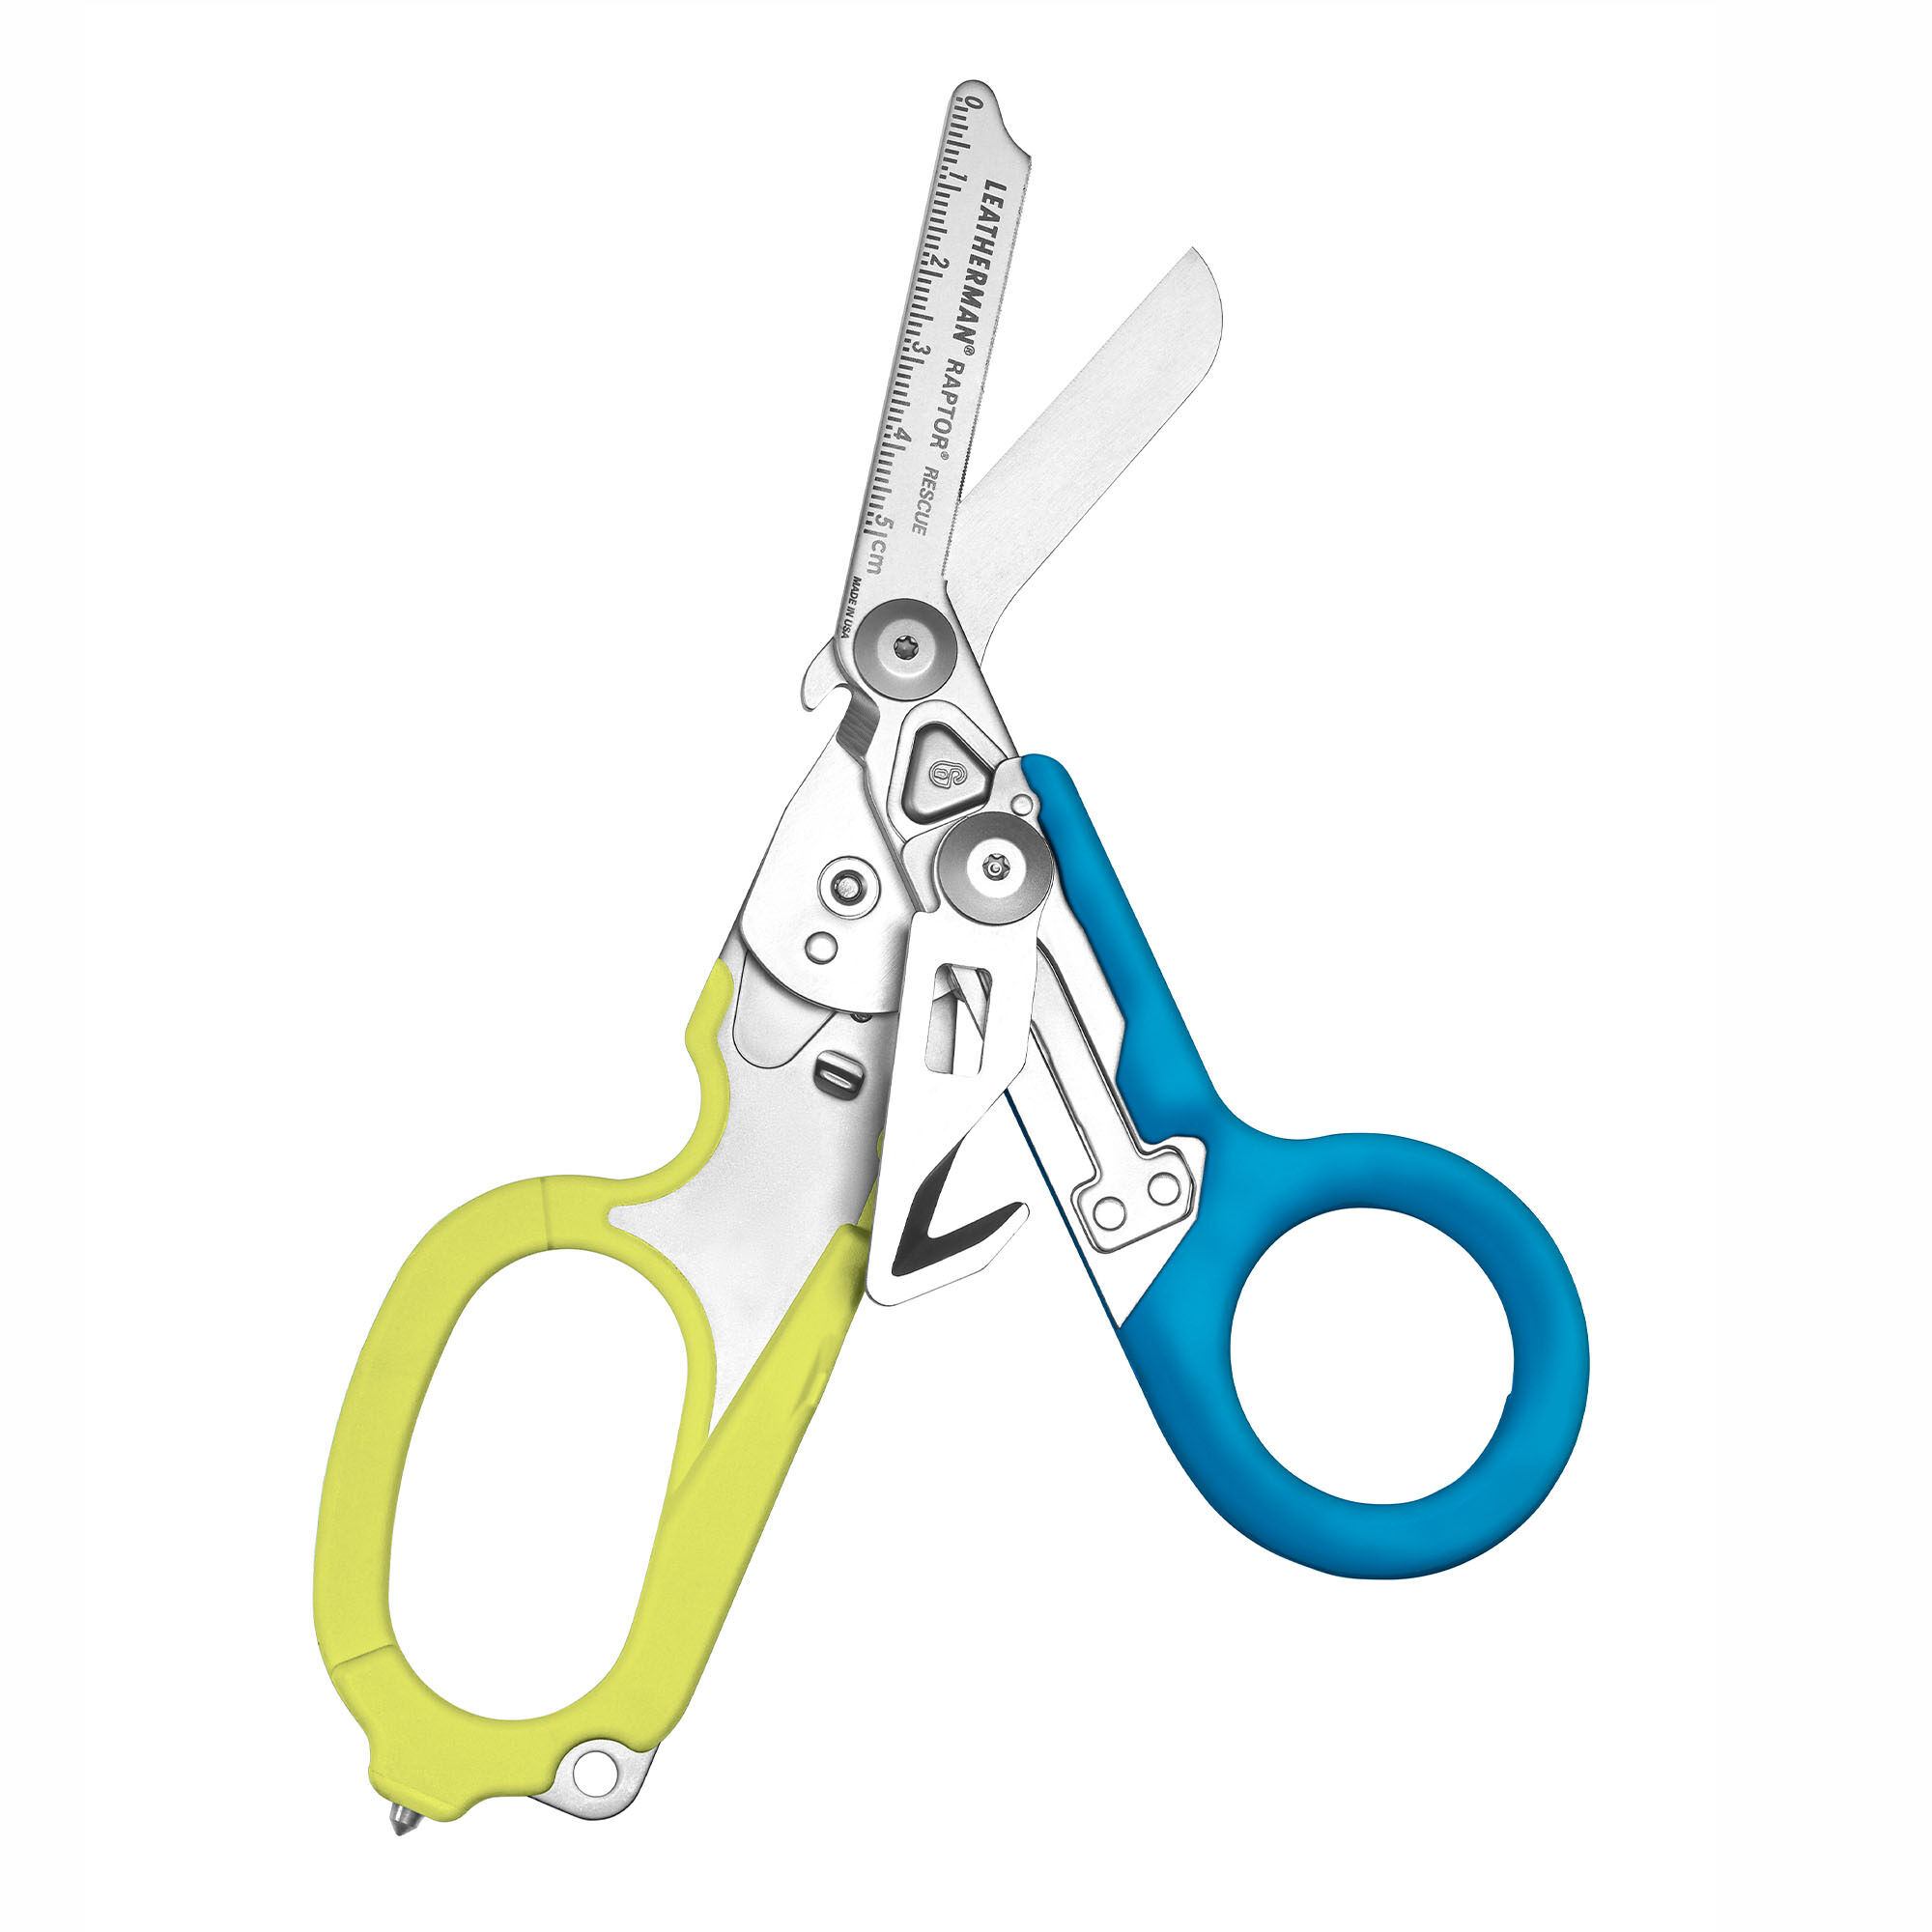 Professional 5.5-inch Pink Trauma Shears with Carabiner for Medical  Emergencies